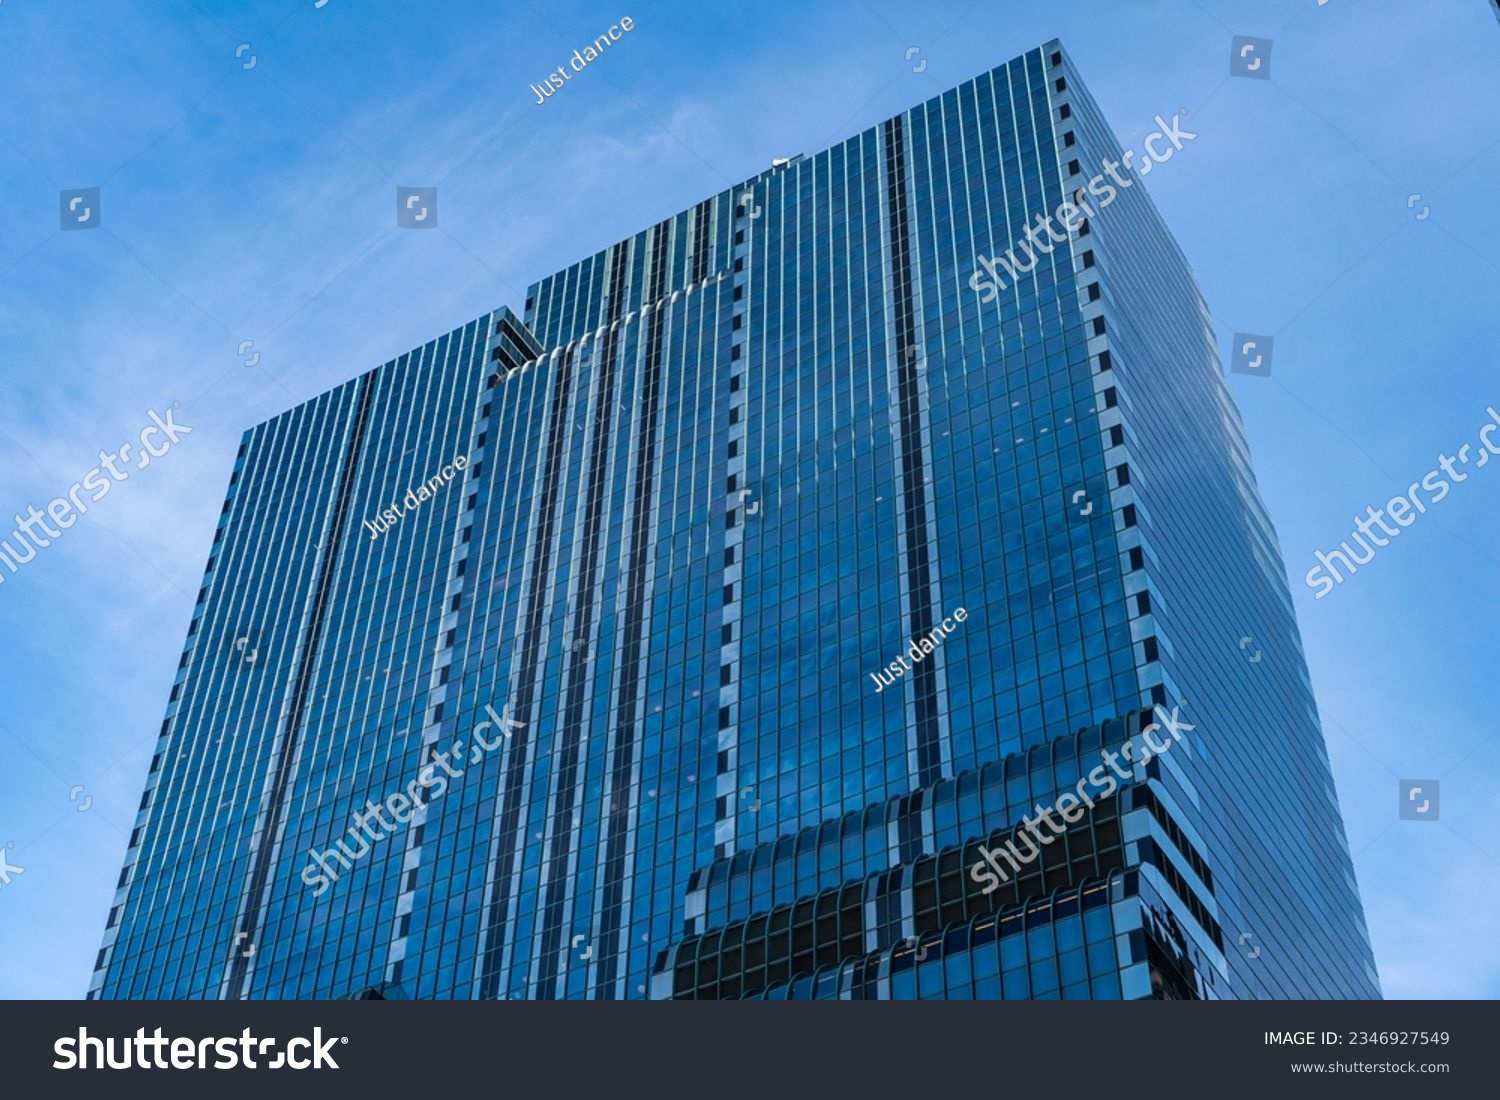 skyscraper in metropolis city. city downtown with skyscraper. office building in business district. skyscraper building architecture. skyscraper with reflective glassy facade. modern glass building #2346927549